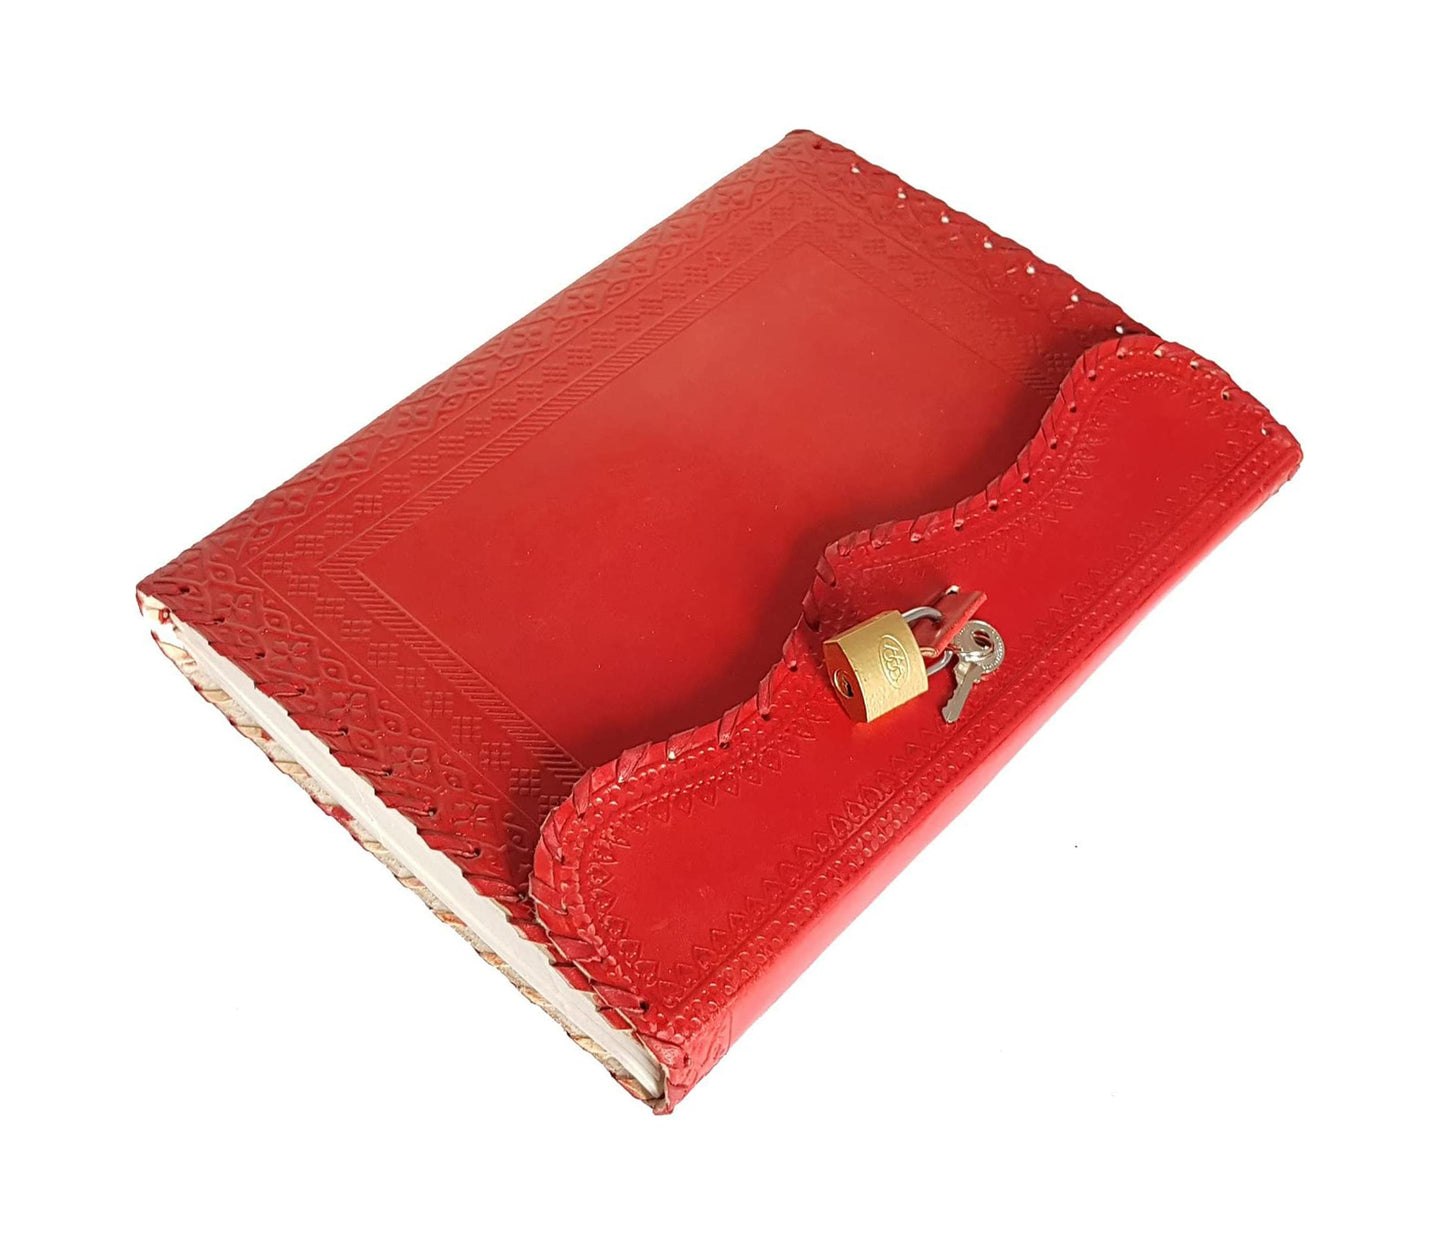 Handmade Vintage Red Leather Journal with Lock